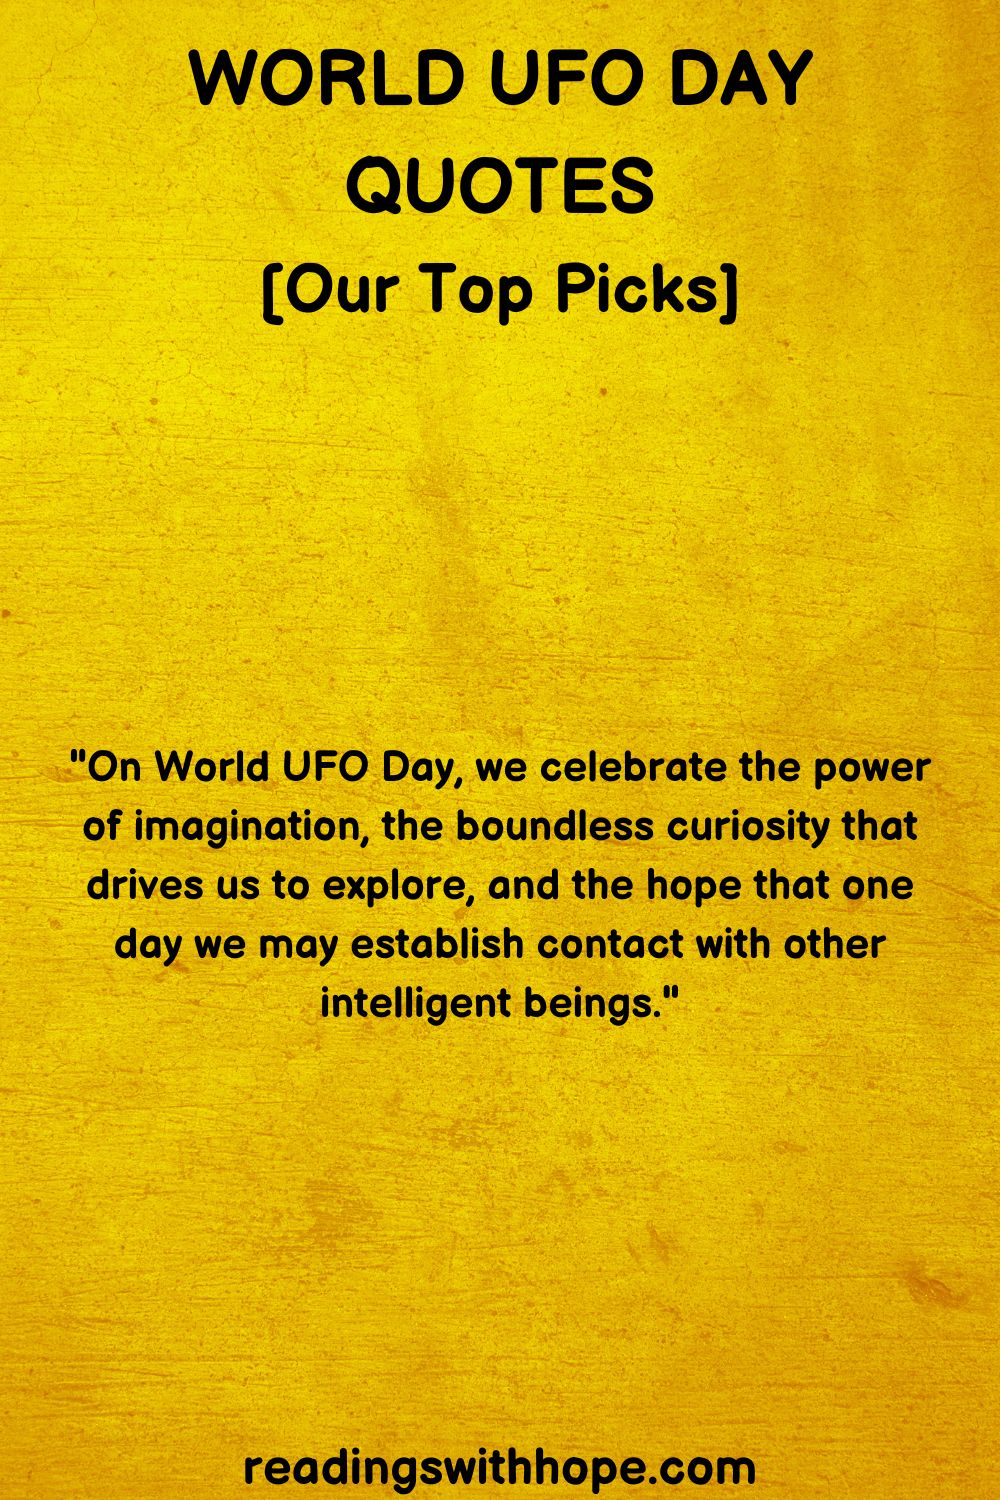 35 World UFO Day Quotes and Messages